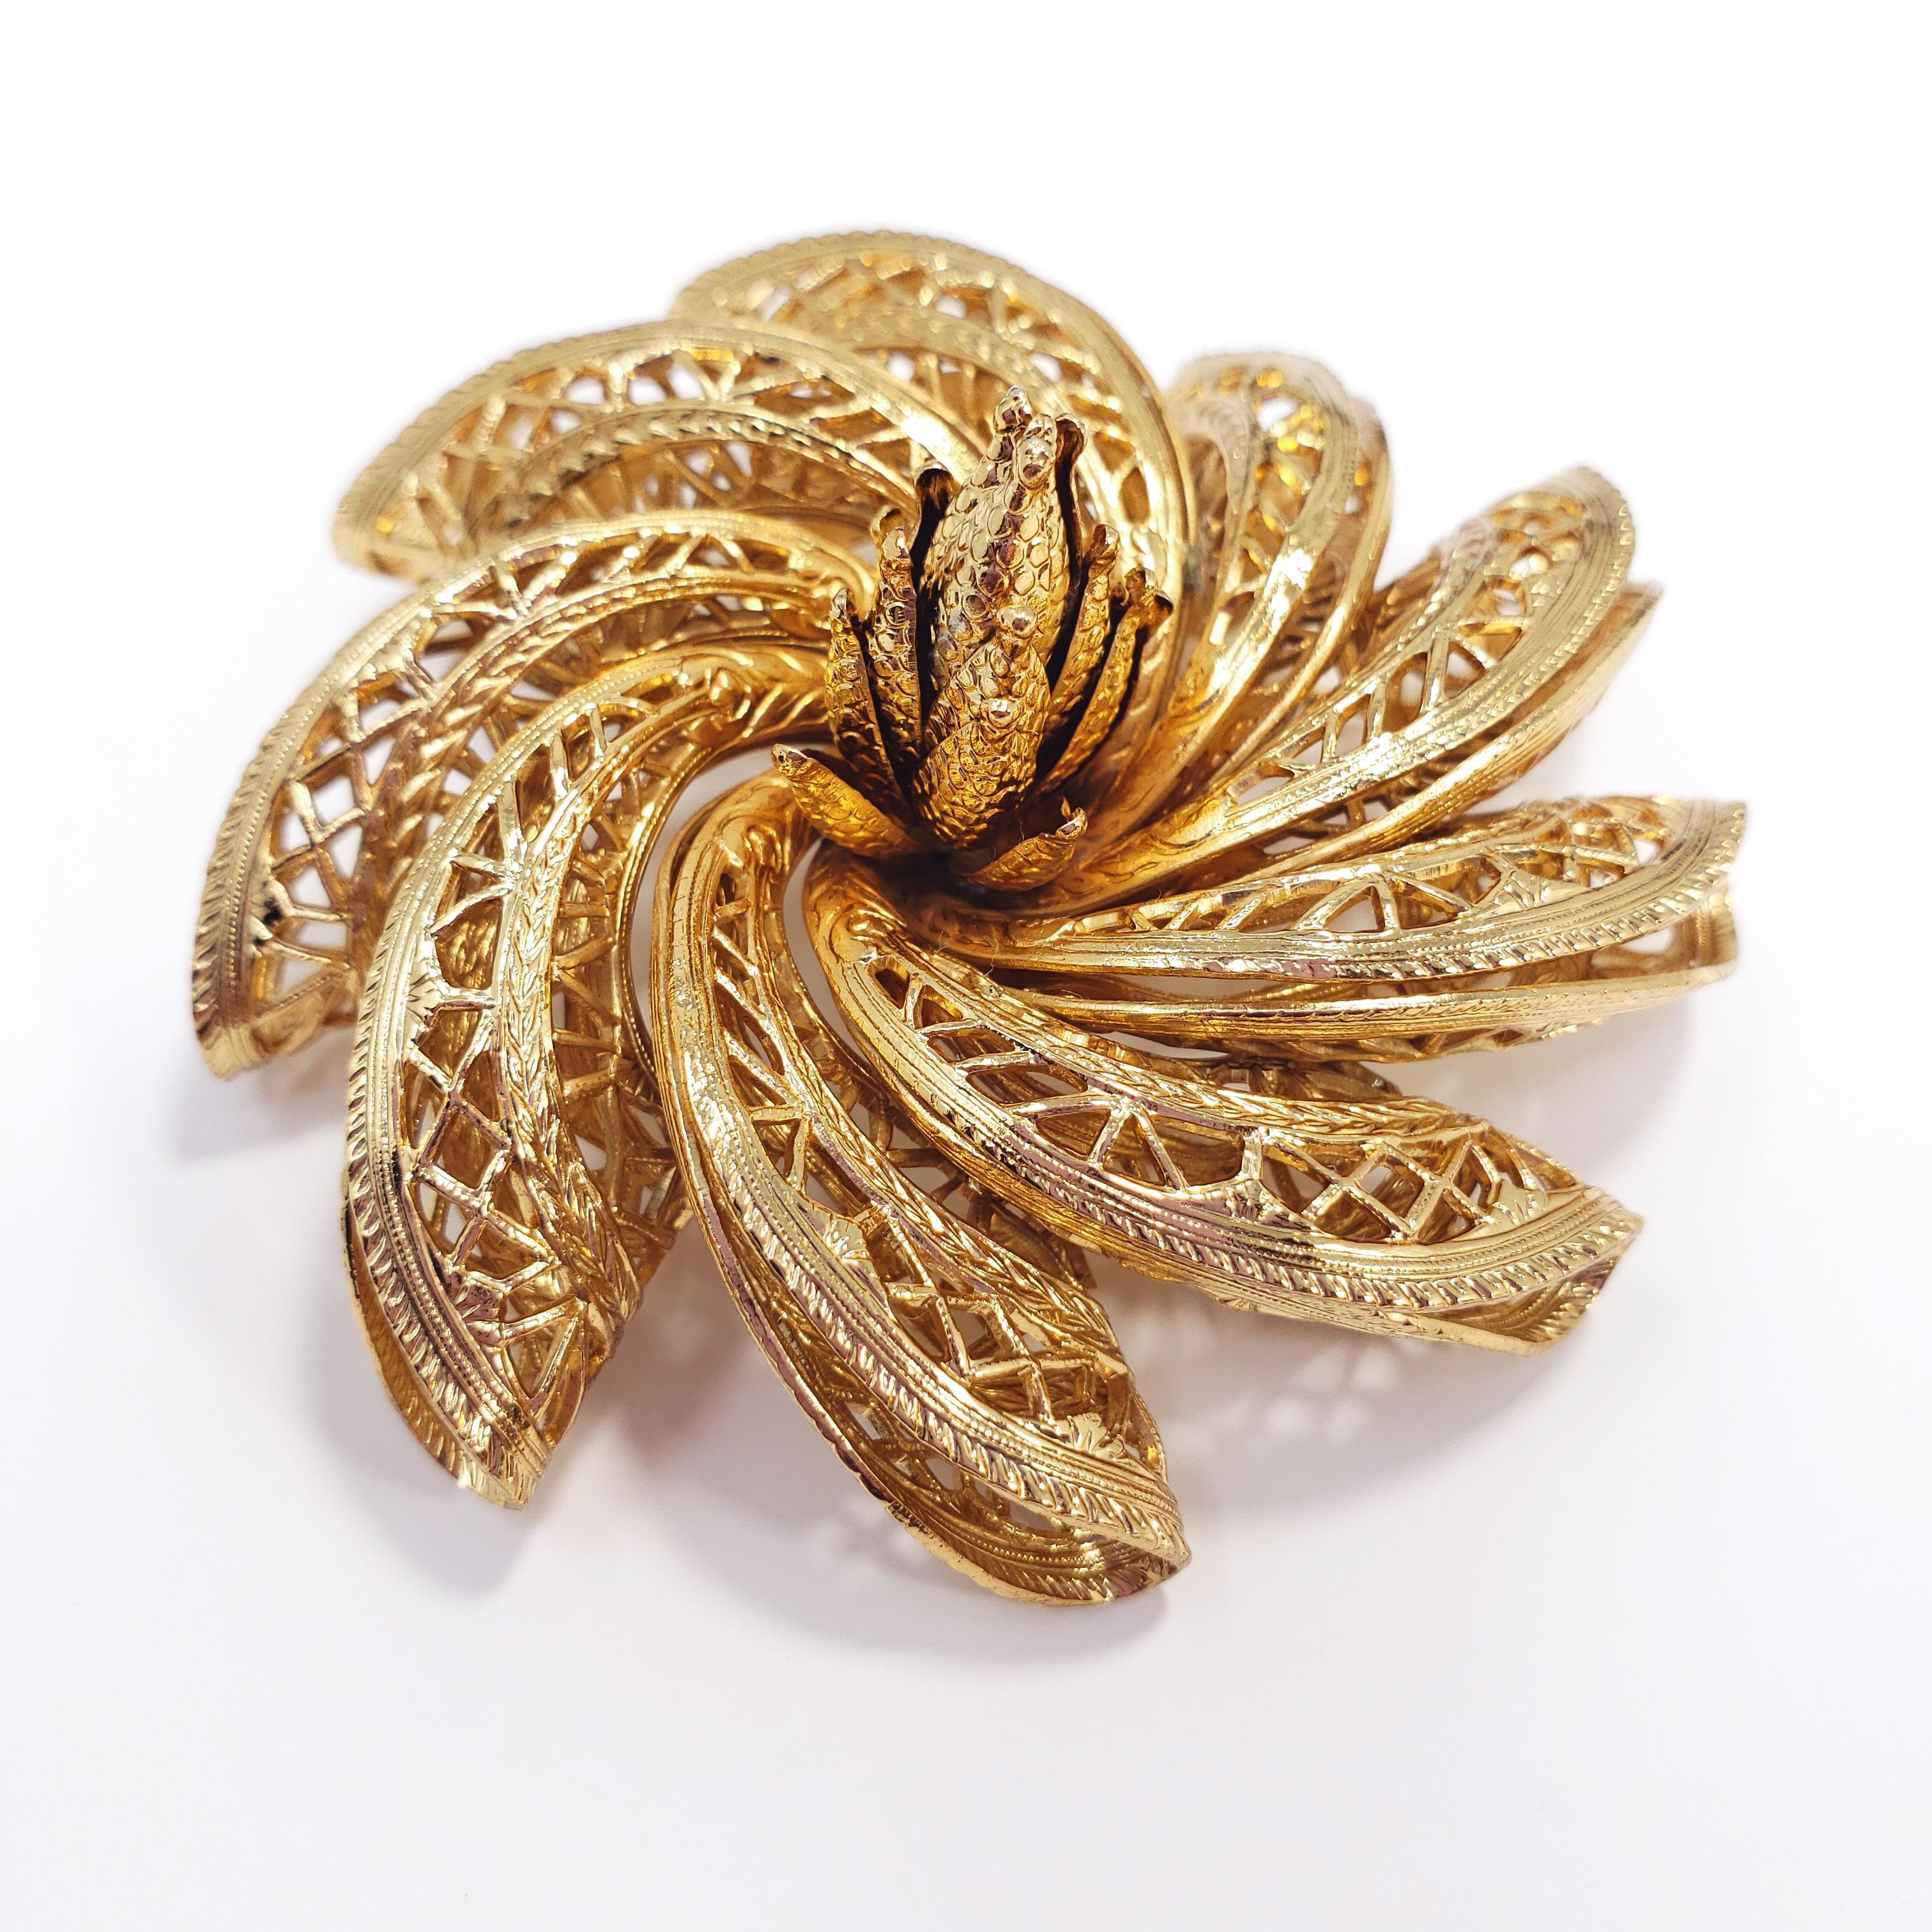 An exquisite 3-D brooch by Corocraft, featuring an intricate filigree petal pattern. Gold filled. Hallmarked © Corocraft.

